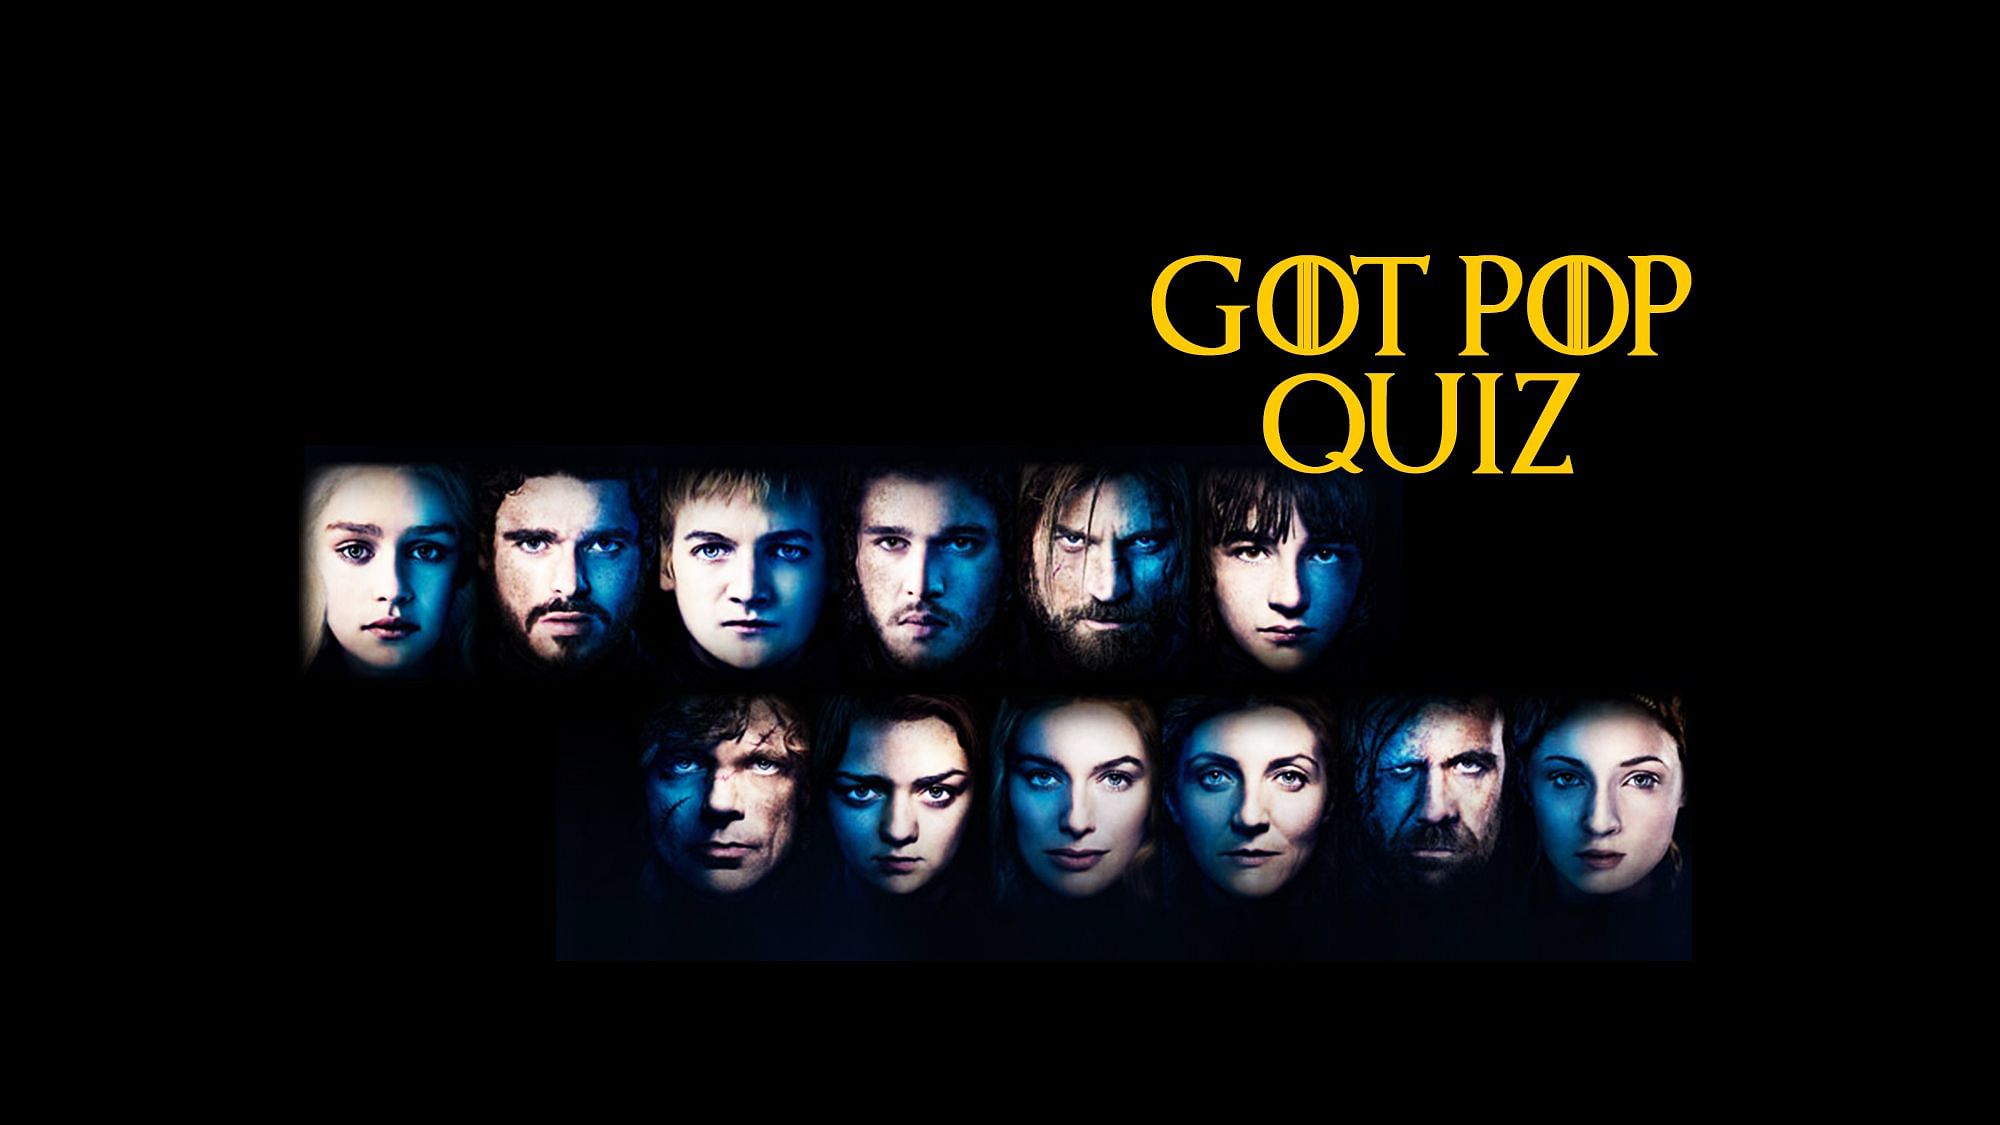 Take this quiz to test your knowledge of the Game of Thrones universe.